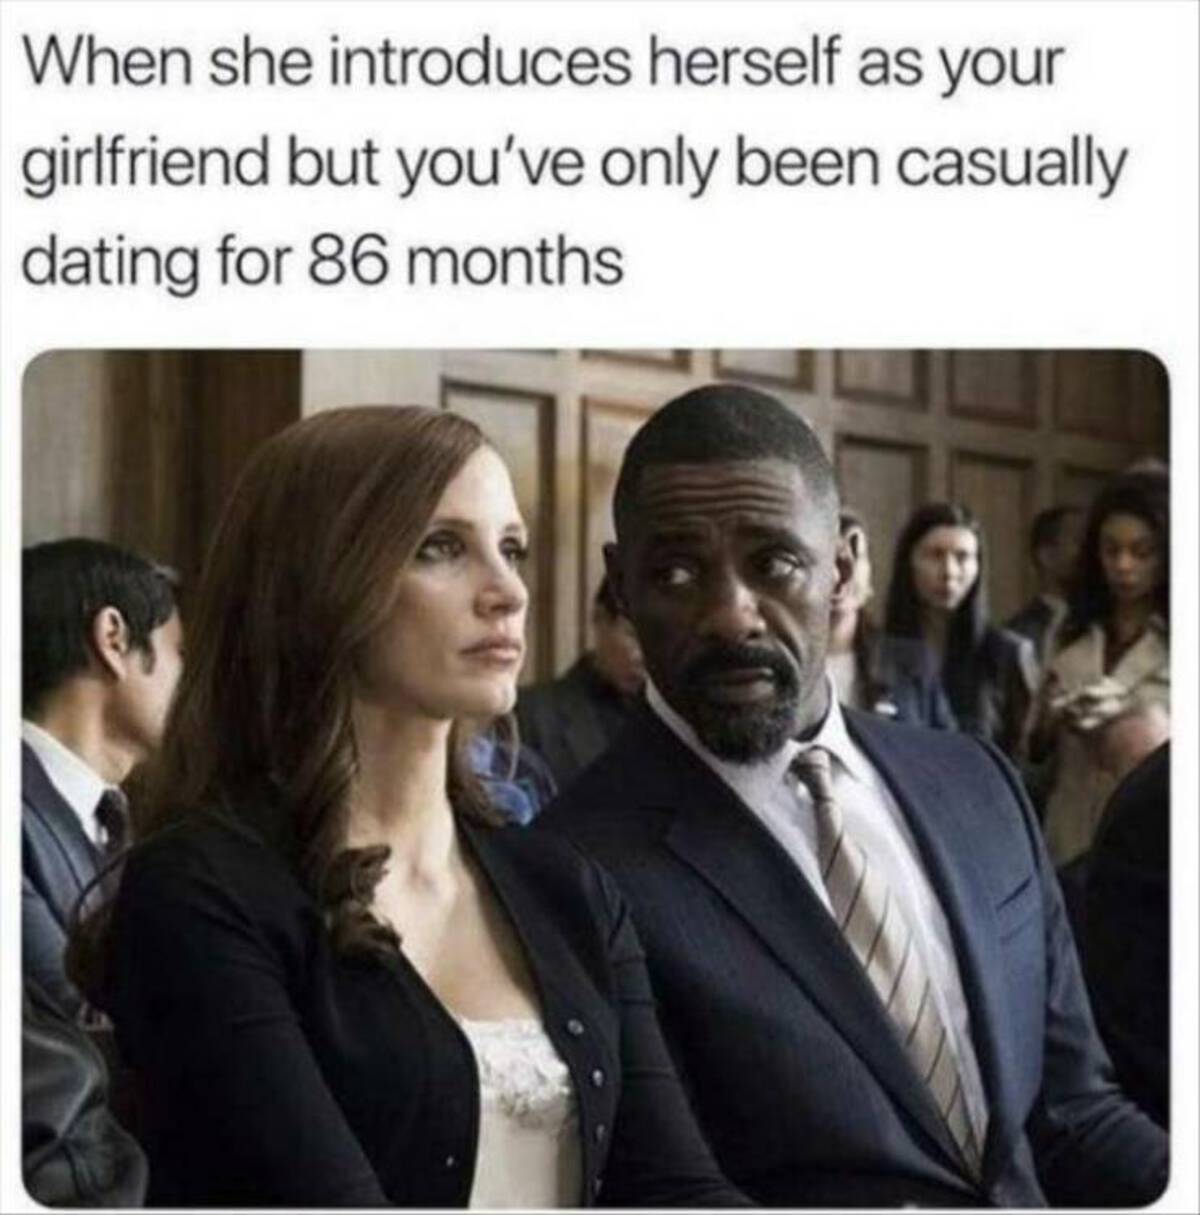 idris elba molly's game - When she introduces herself as your girlfriend but you've only been casually dating for 86 months